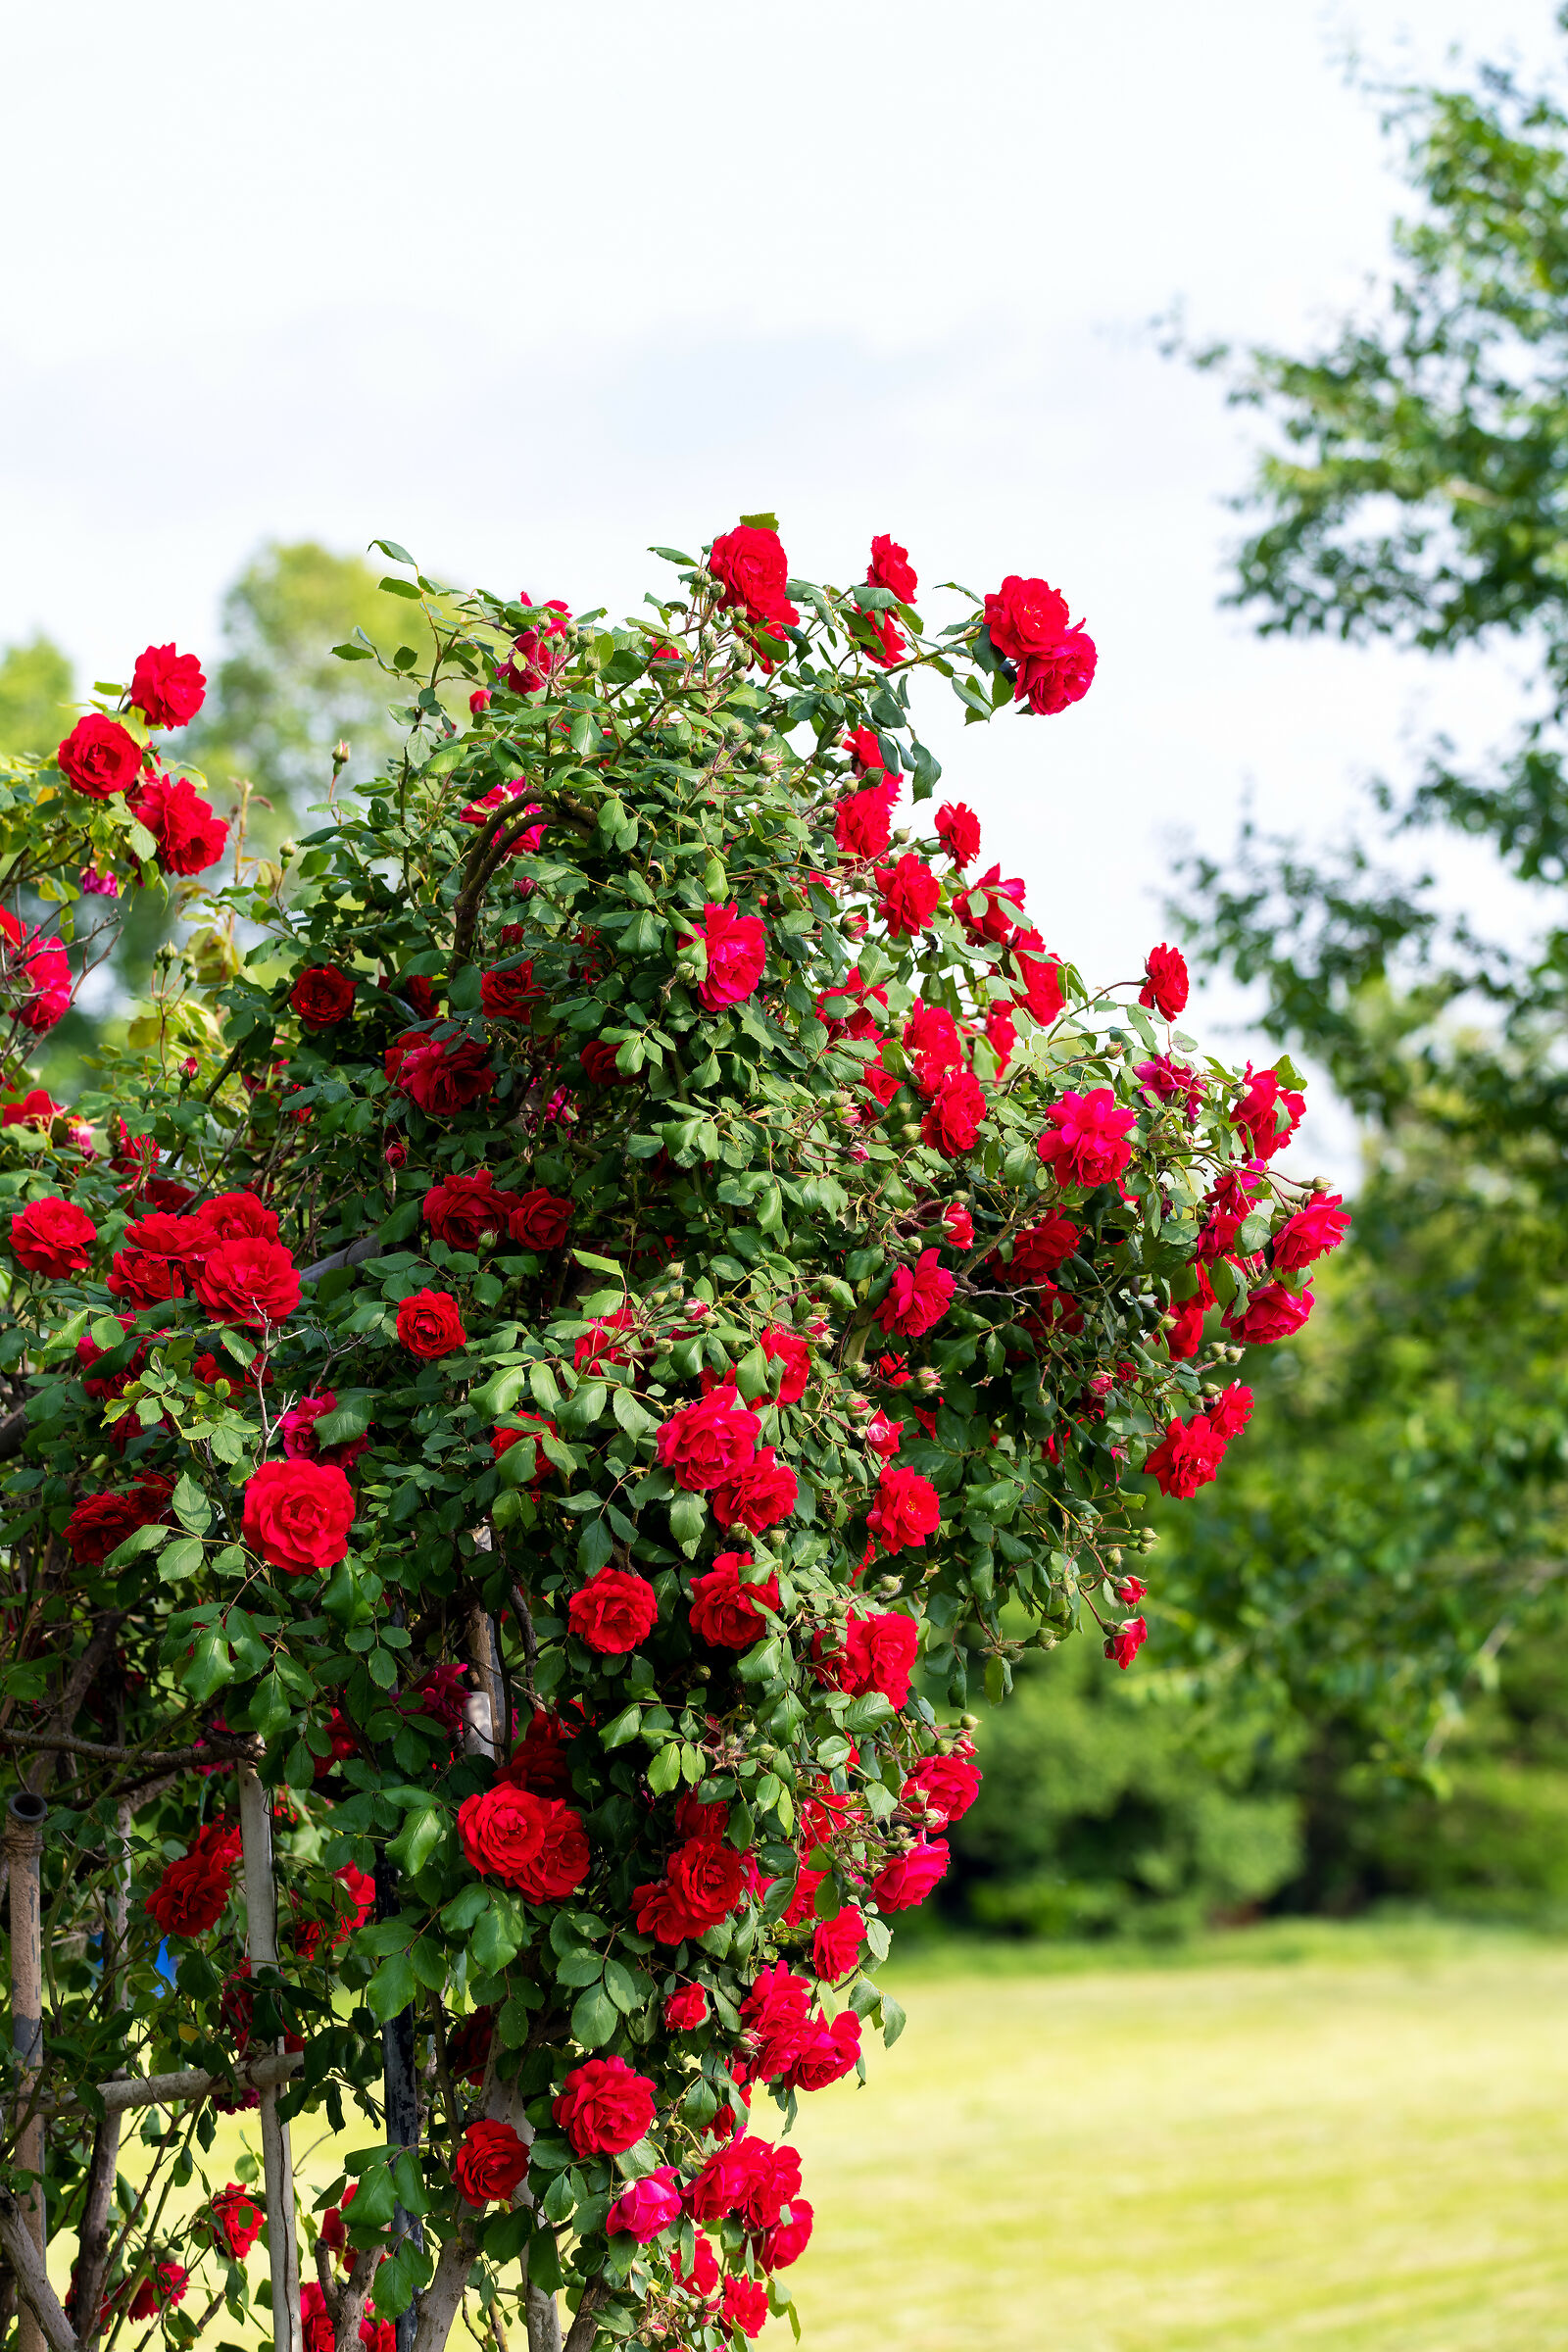 Red Roses, in the heart of the countryside......